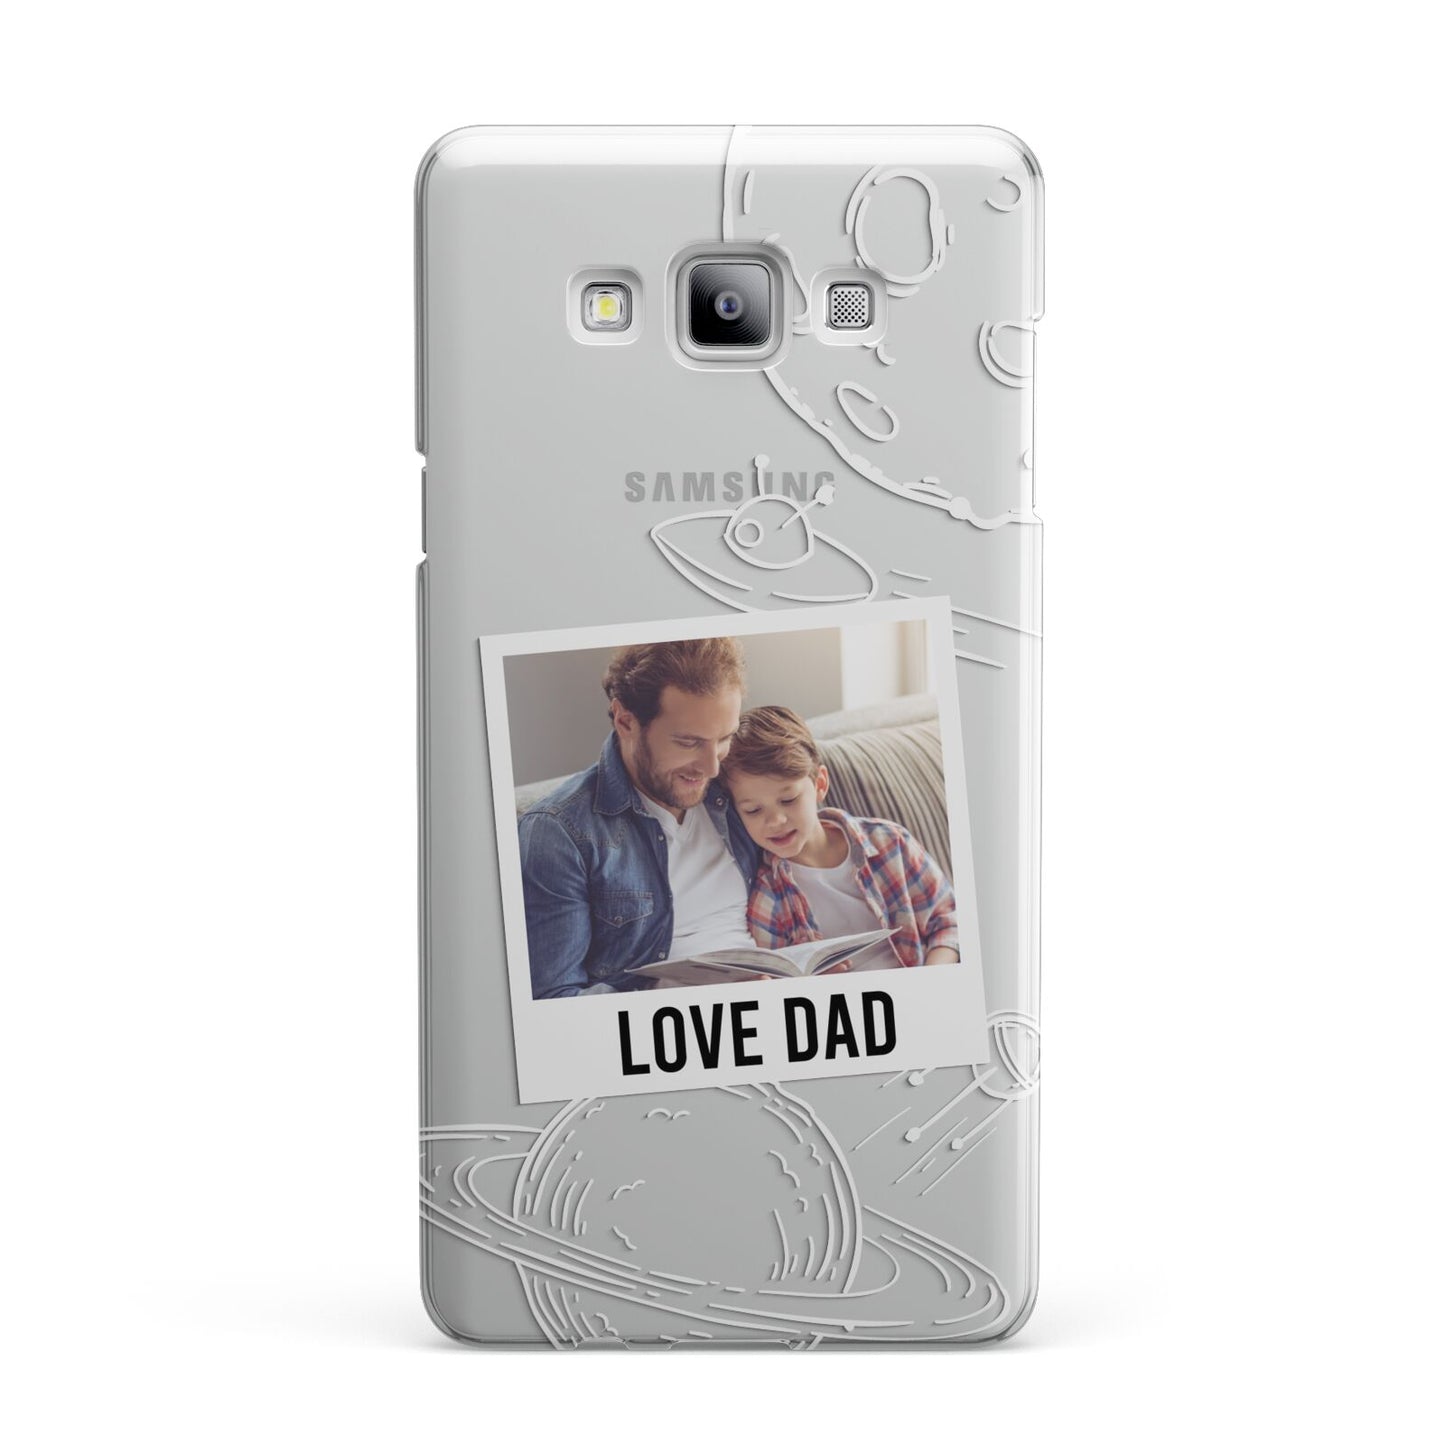 Personalised From Dad Photo Samsung Galaxy A7 2015 Case